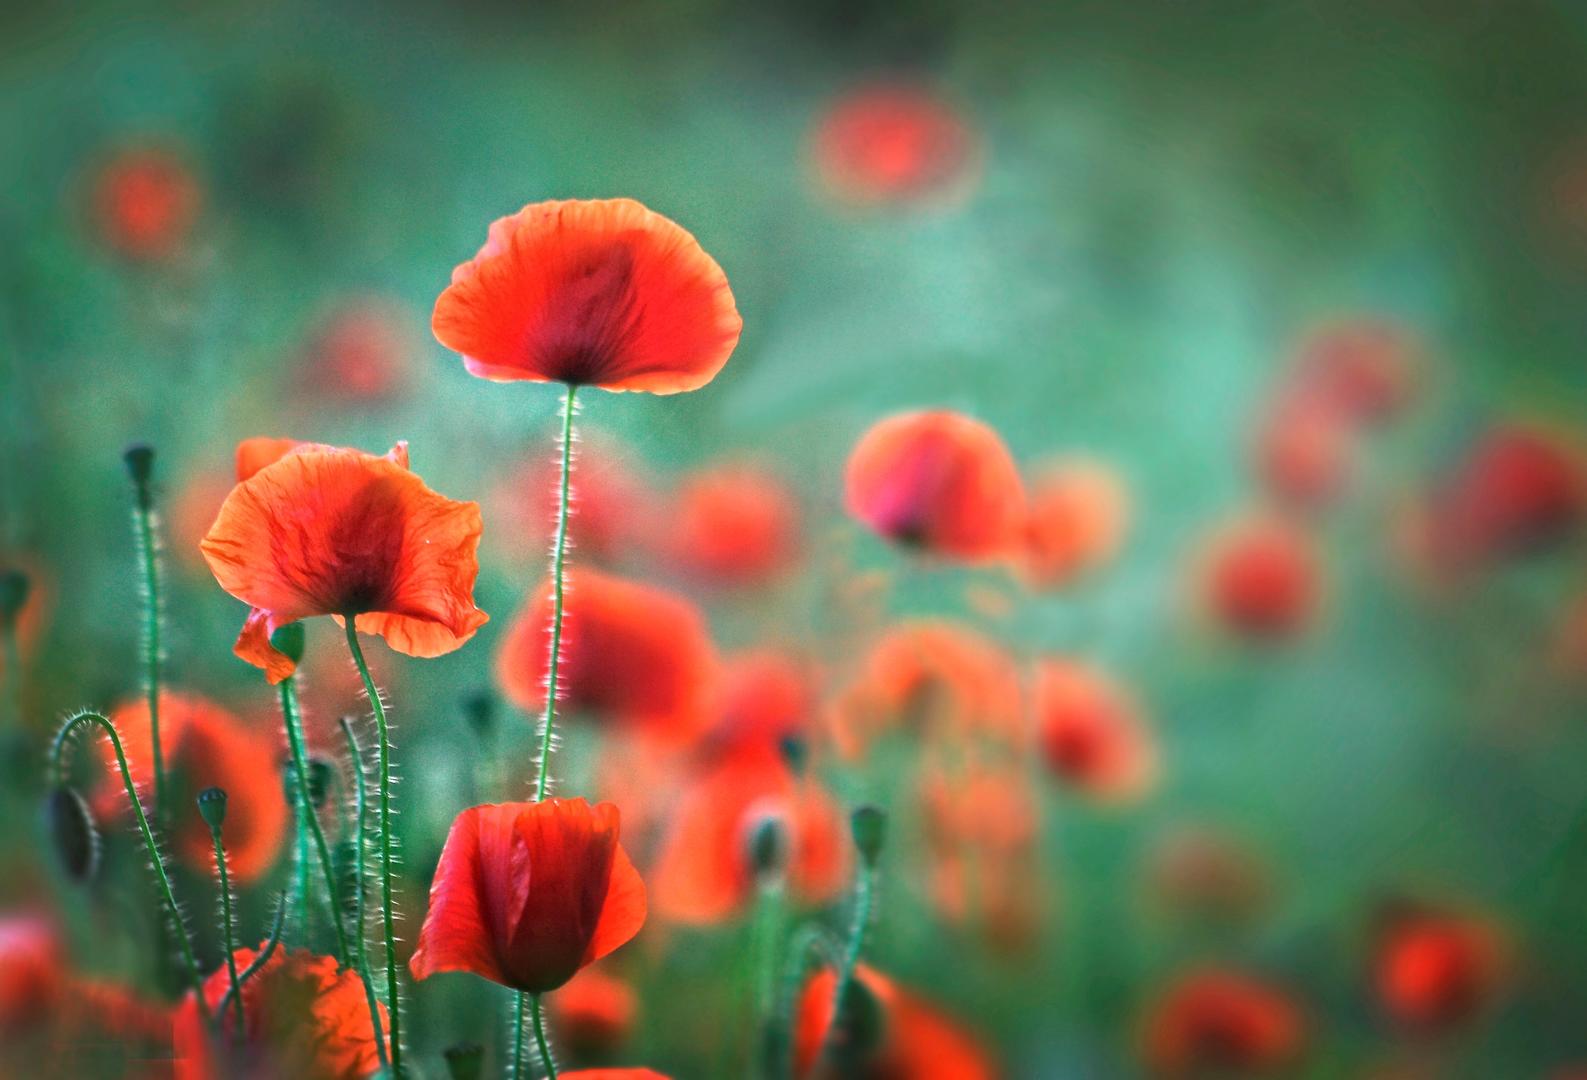 Summer Poppies by Ceri Jones | Photocrowd photo competitions ...